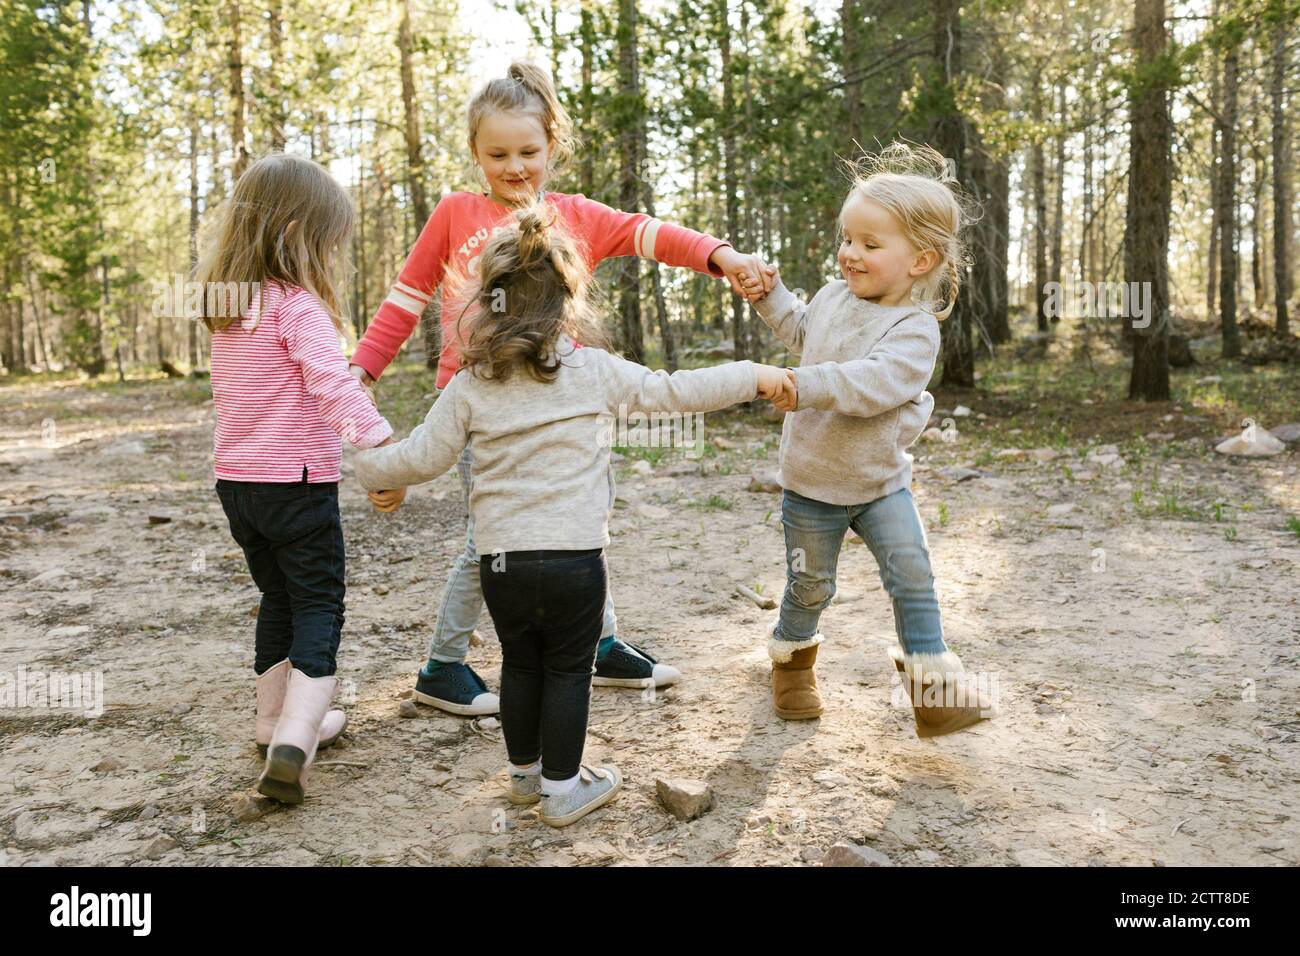 Little girls (2-3, 4-5, 6-7) holding hands and walking in circle Uinta-Wasatch-Cache National Forest Stock Photo